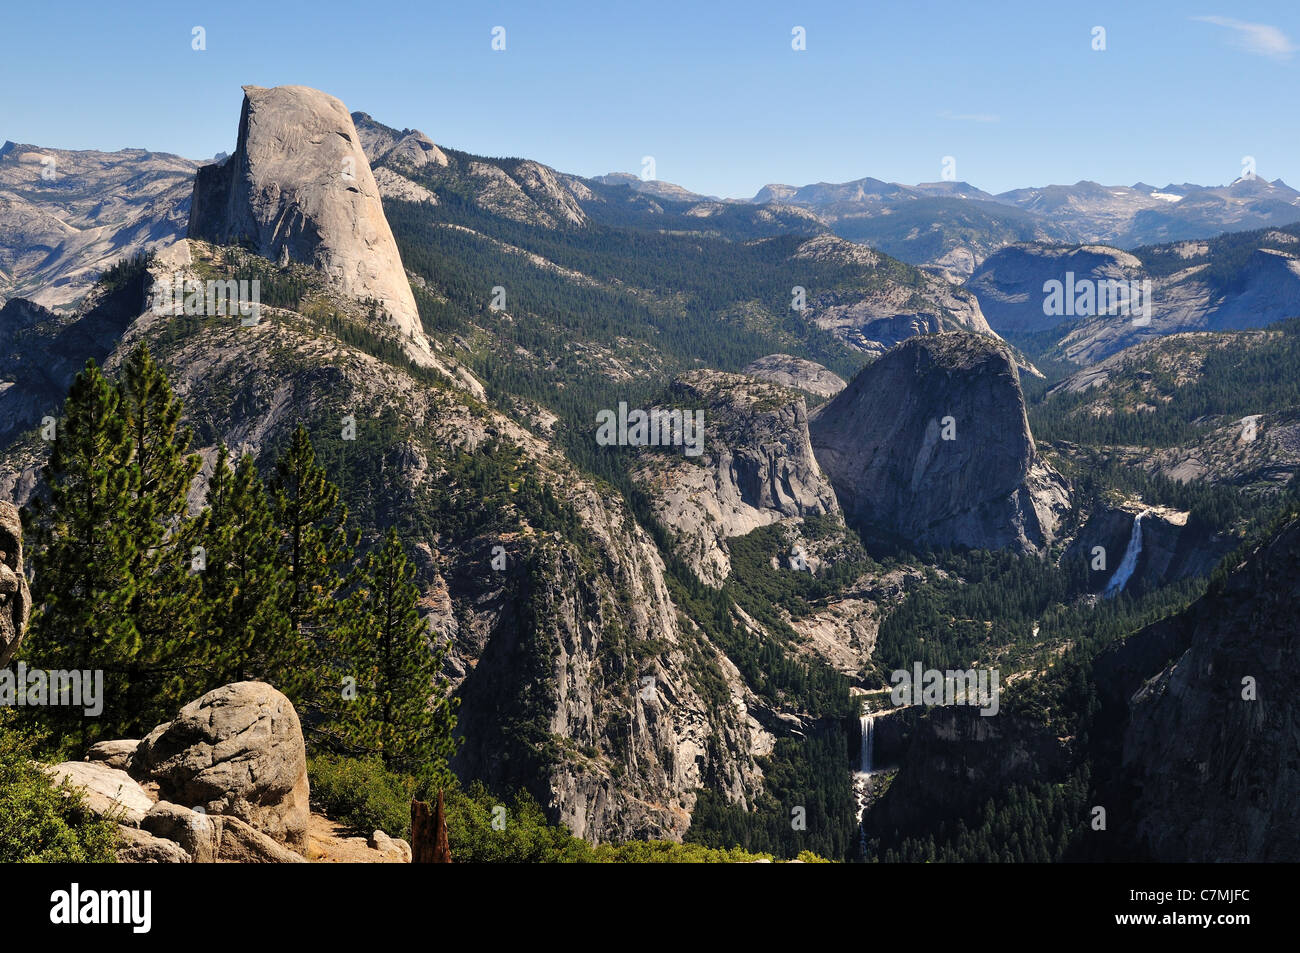 View of the Half Dome and Vernal and Nevada Falls from Washburn Point. Yosemite National Park, California, USA. Stock Photo